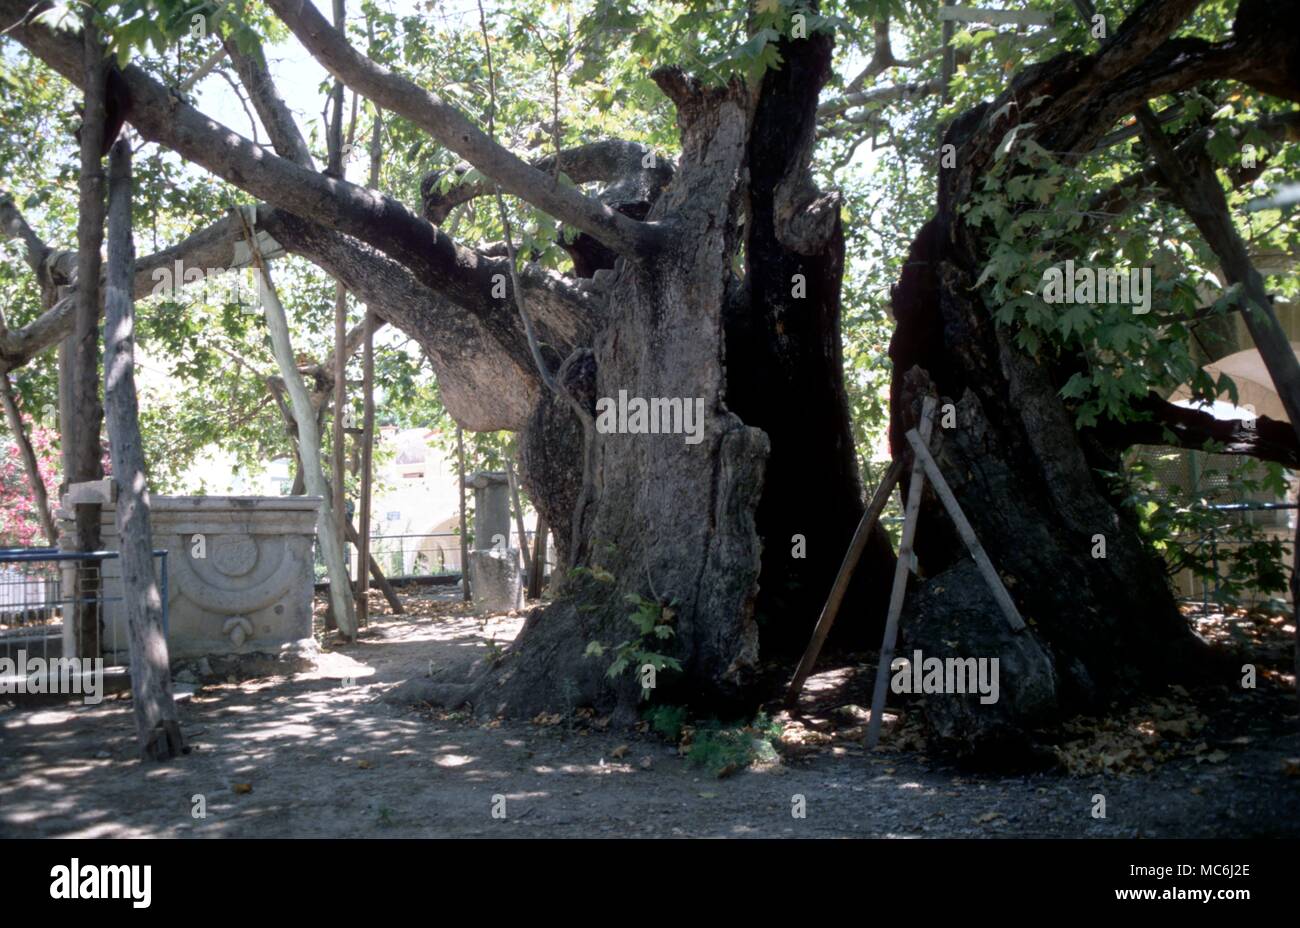 Greek Medicine The healing tree of Hippocrates on the island of Cos Stock Photo